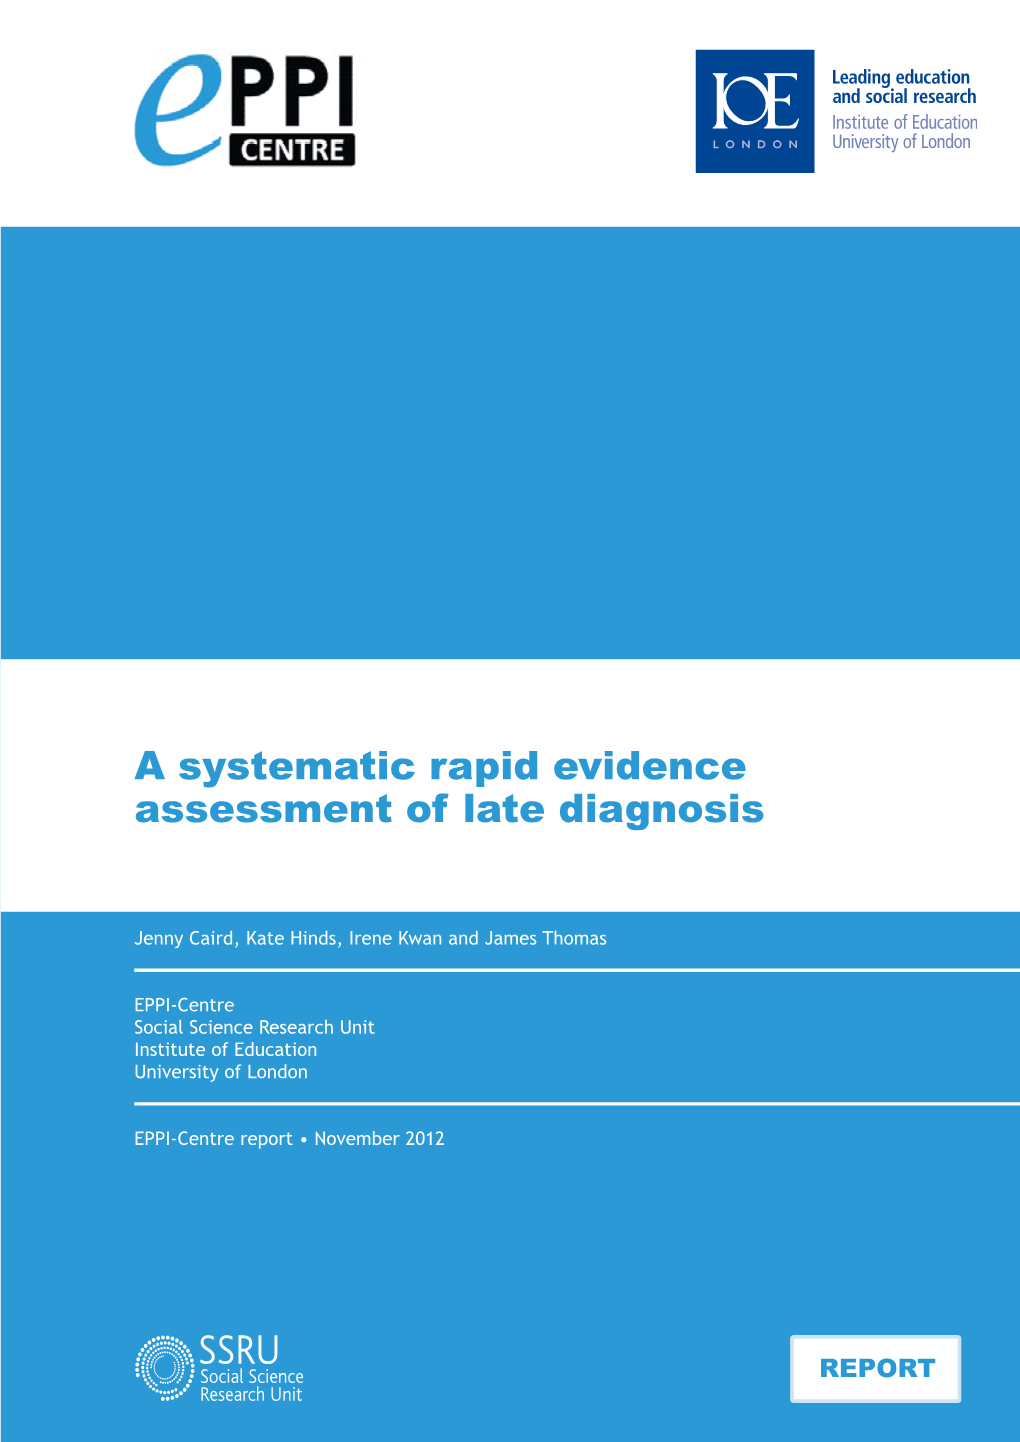 A Systematic Rapid Evidence Assessment of Late Diagnosis